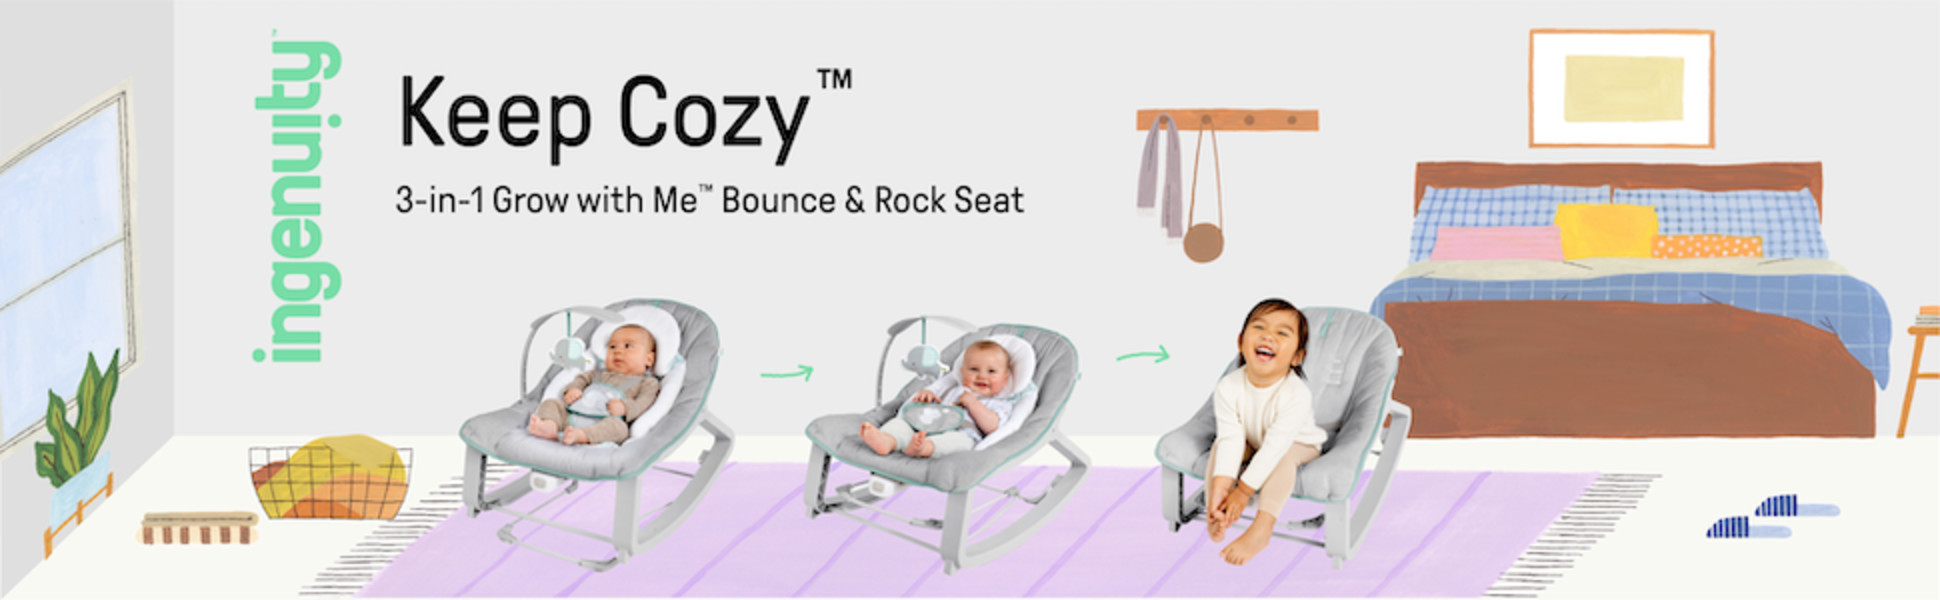 Keep Cozy 3-in-1 Grow with Me Bounce & Rock Seat - Spruce – Kids2, LLC